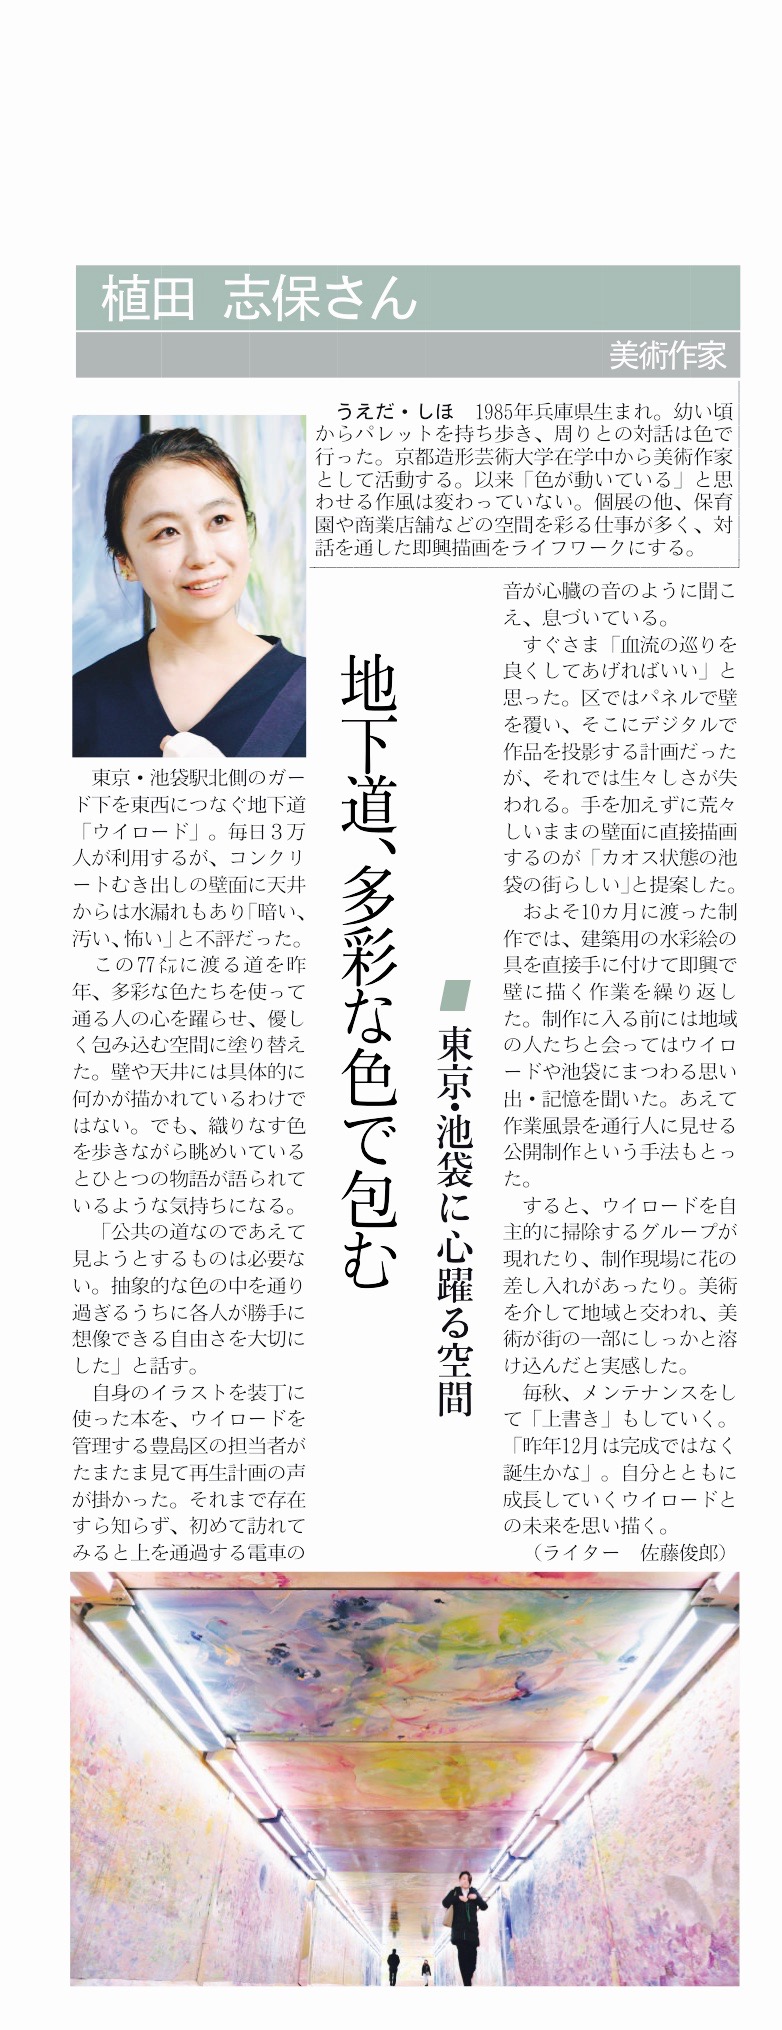 Interview Shiho Ueda Official Site